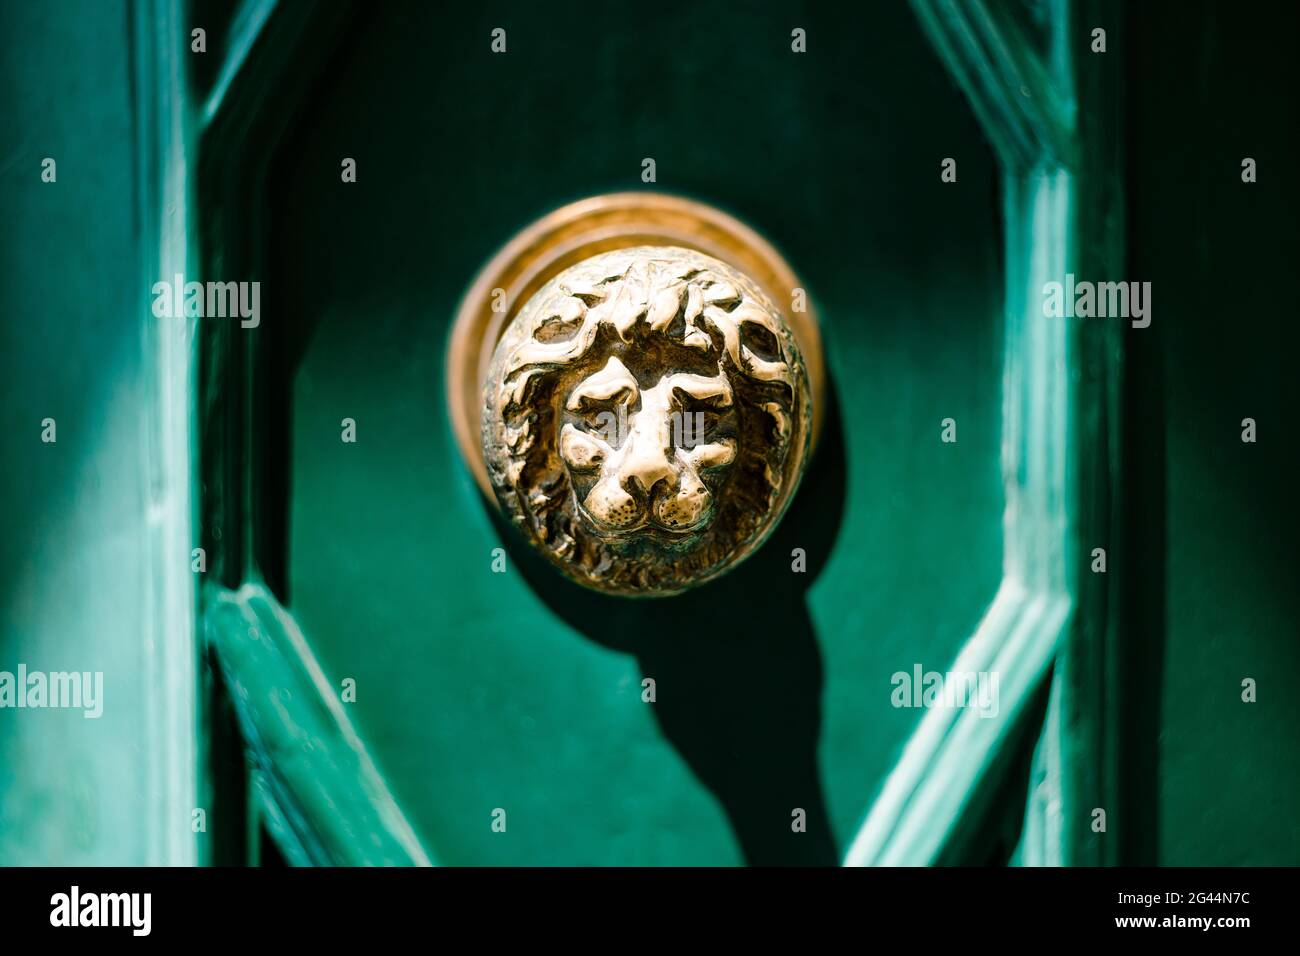 Image of a lion on a green background on a painted wooden surface. Stock Photo